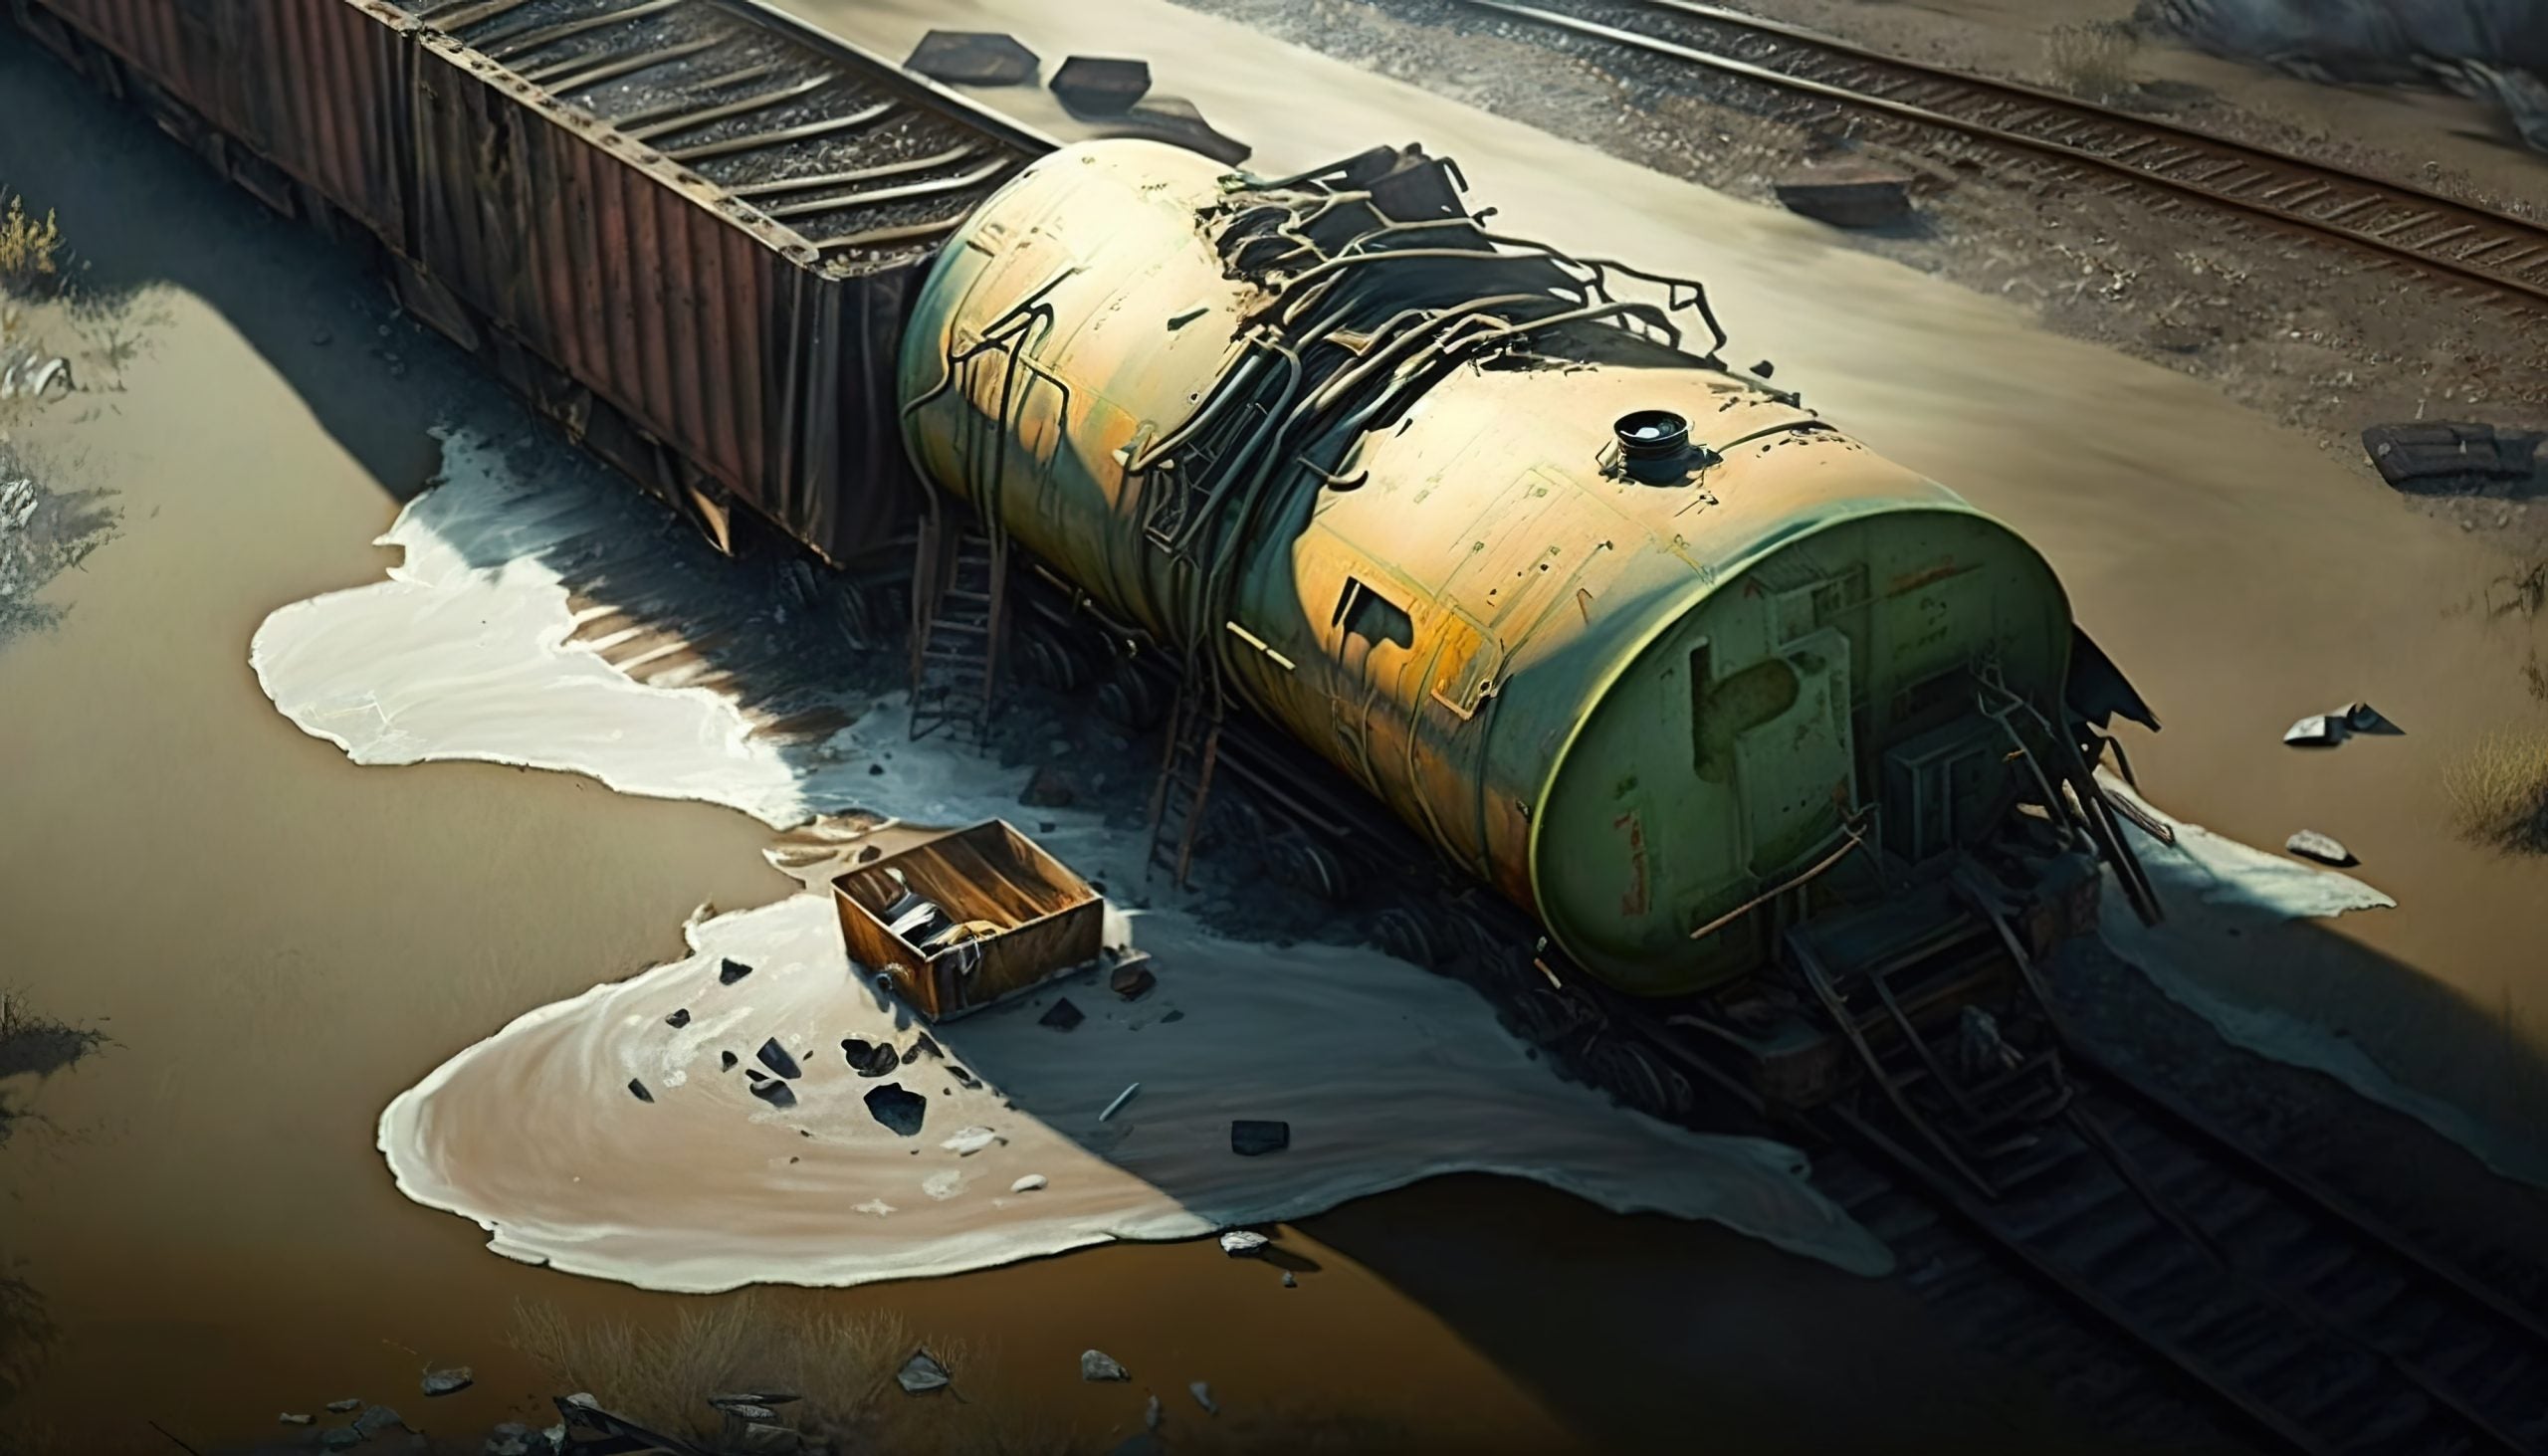 Derailed train, leaking toxic chemicals